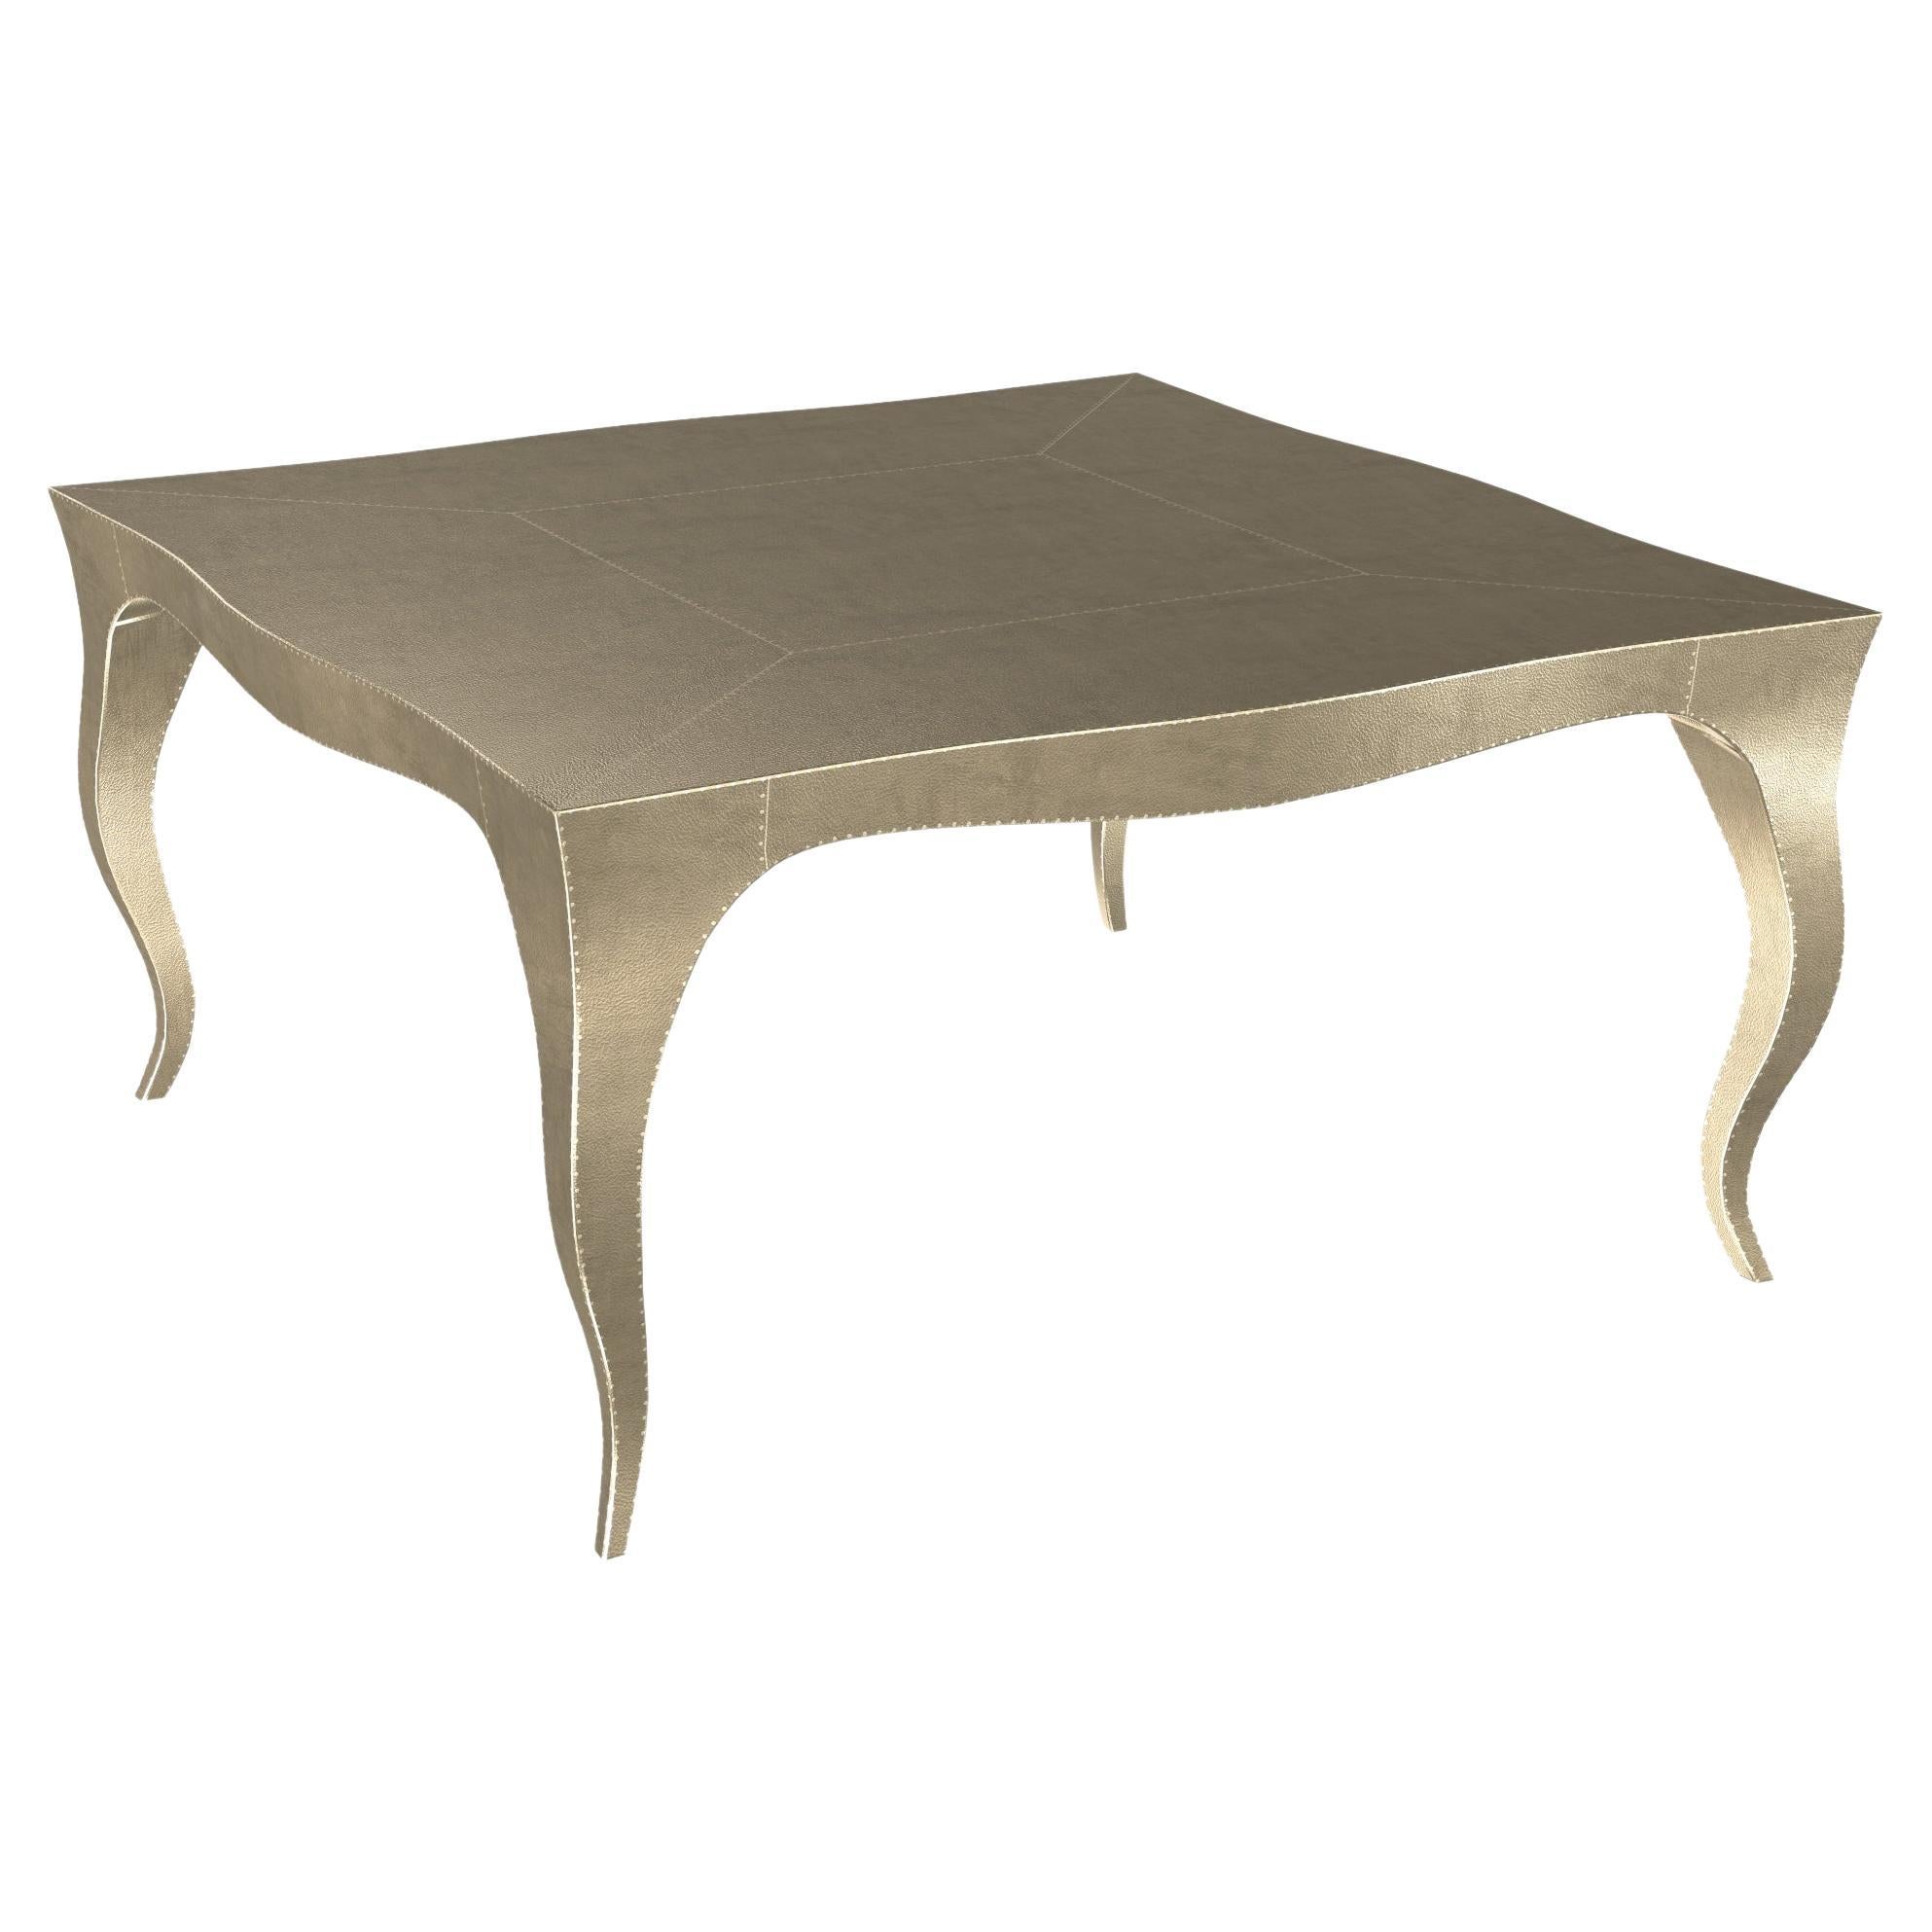 Louise Art Deco Nesting Tables Fine Hammered Brass 18.5x18.5x10 inch by Paul M.